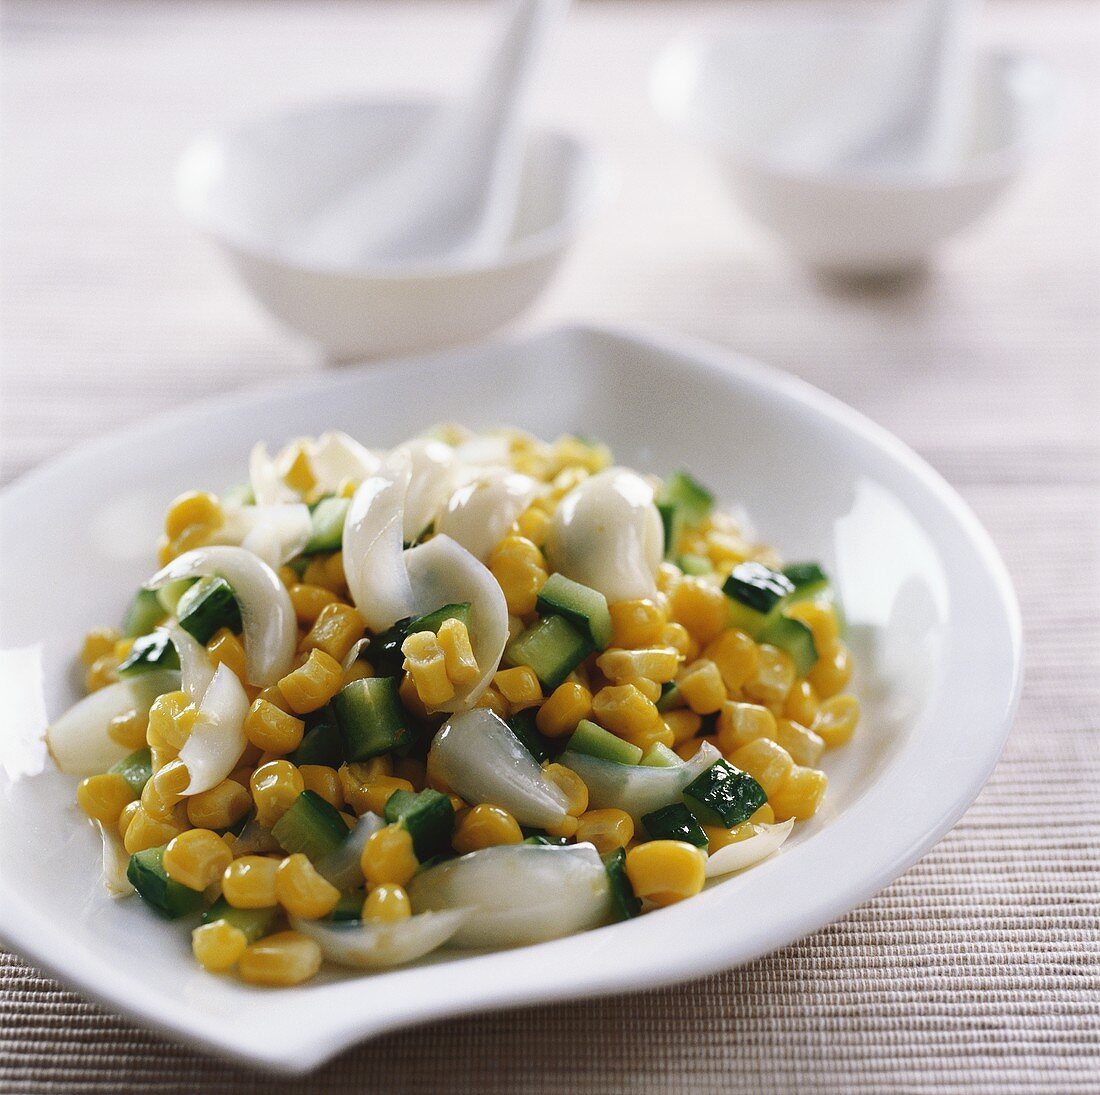 Sweetcorn with cucumber and lily scales